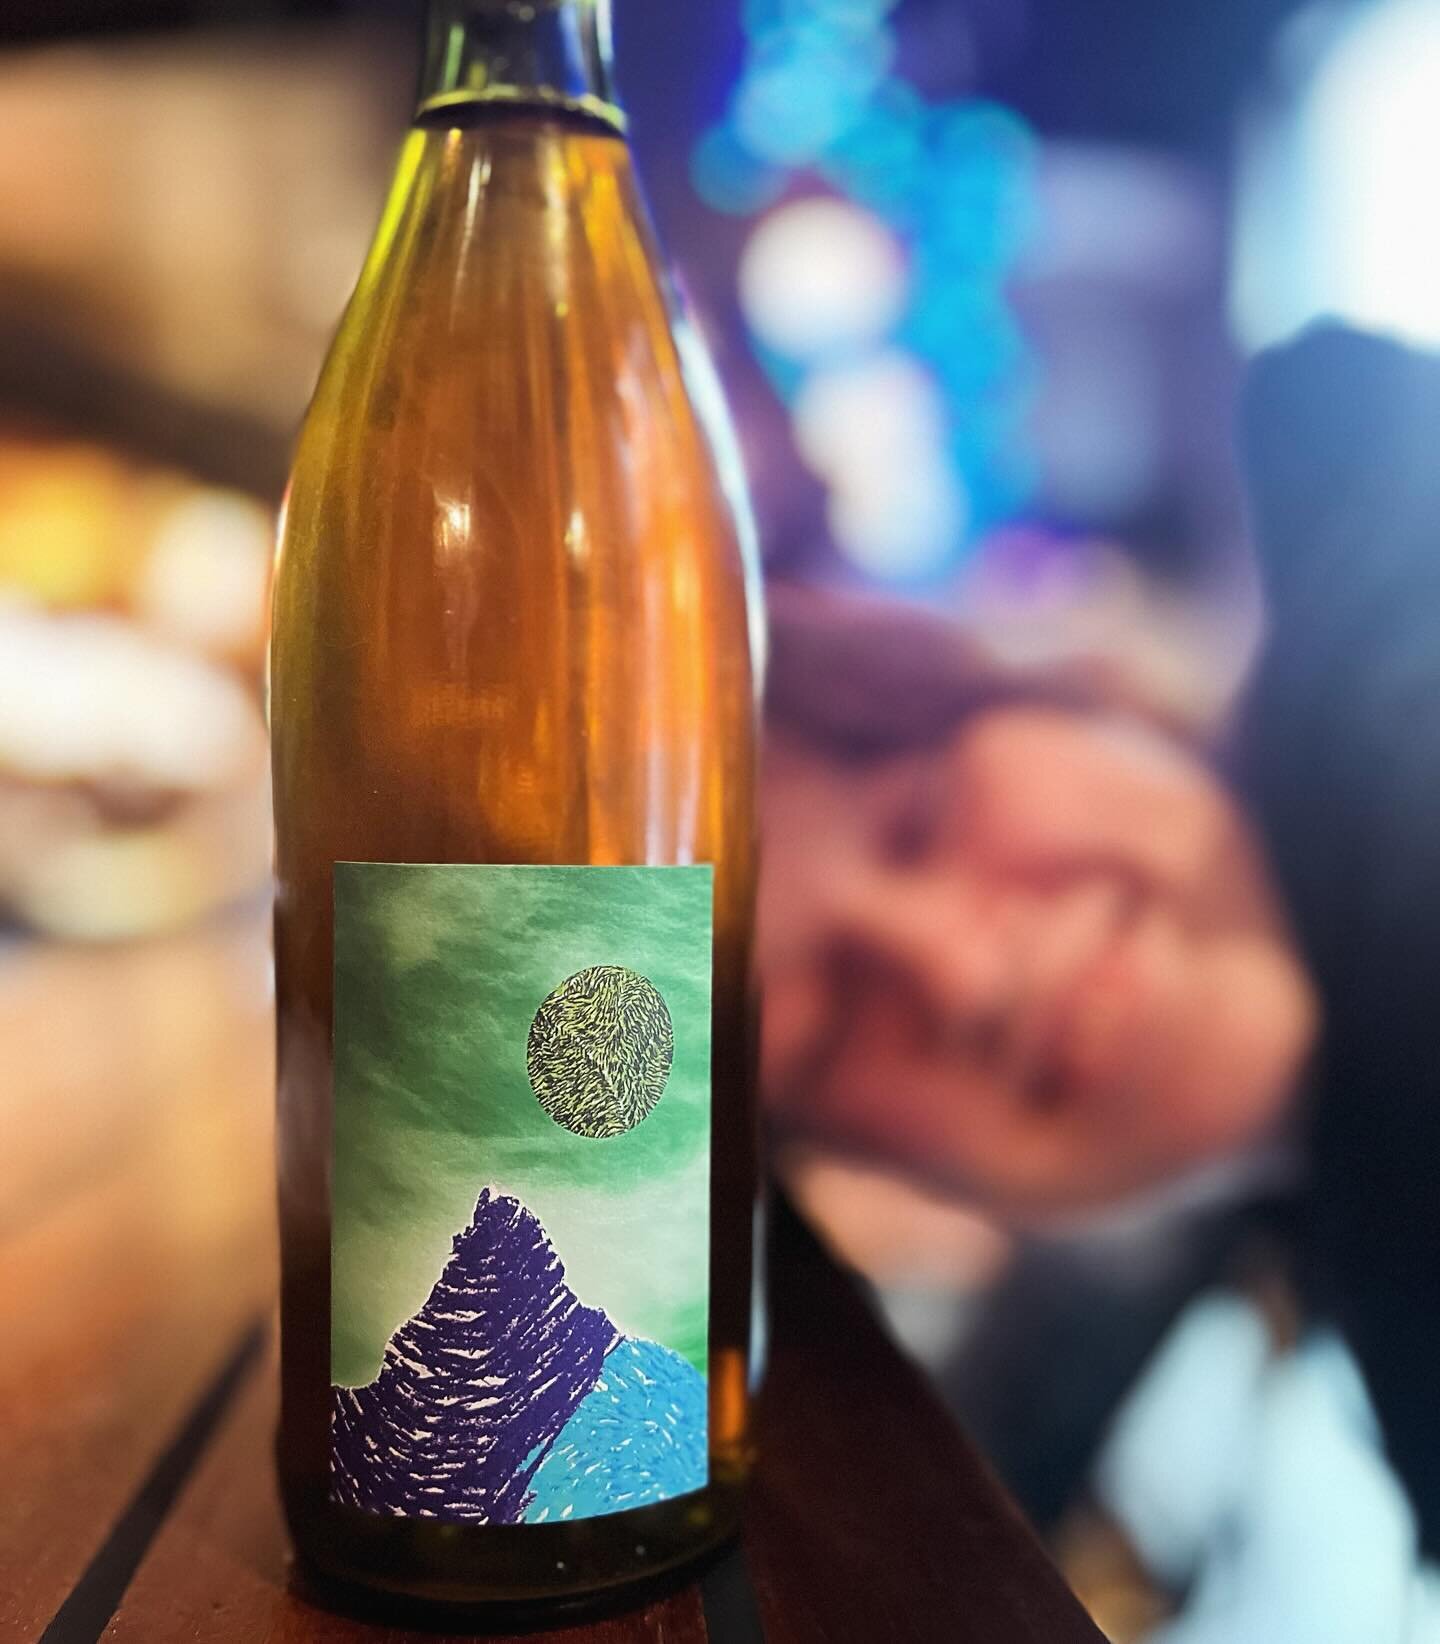 Put your hands together for this new little addition to our wine list from winemaker Alice L'Estrange of @lasfermentadas @strangegrapes 

Incredible floral notes with hints of sandalwood &amp; bursting tropics.  This is indeed our newest crush; shit 